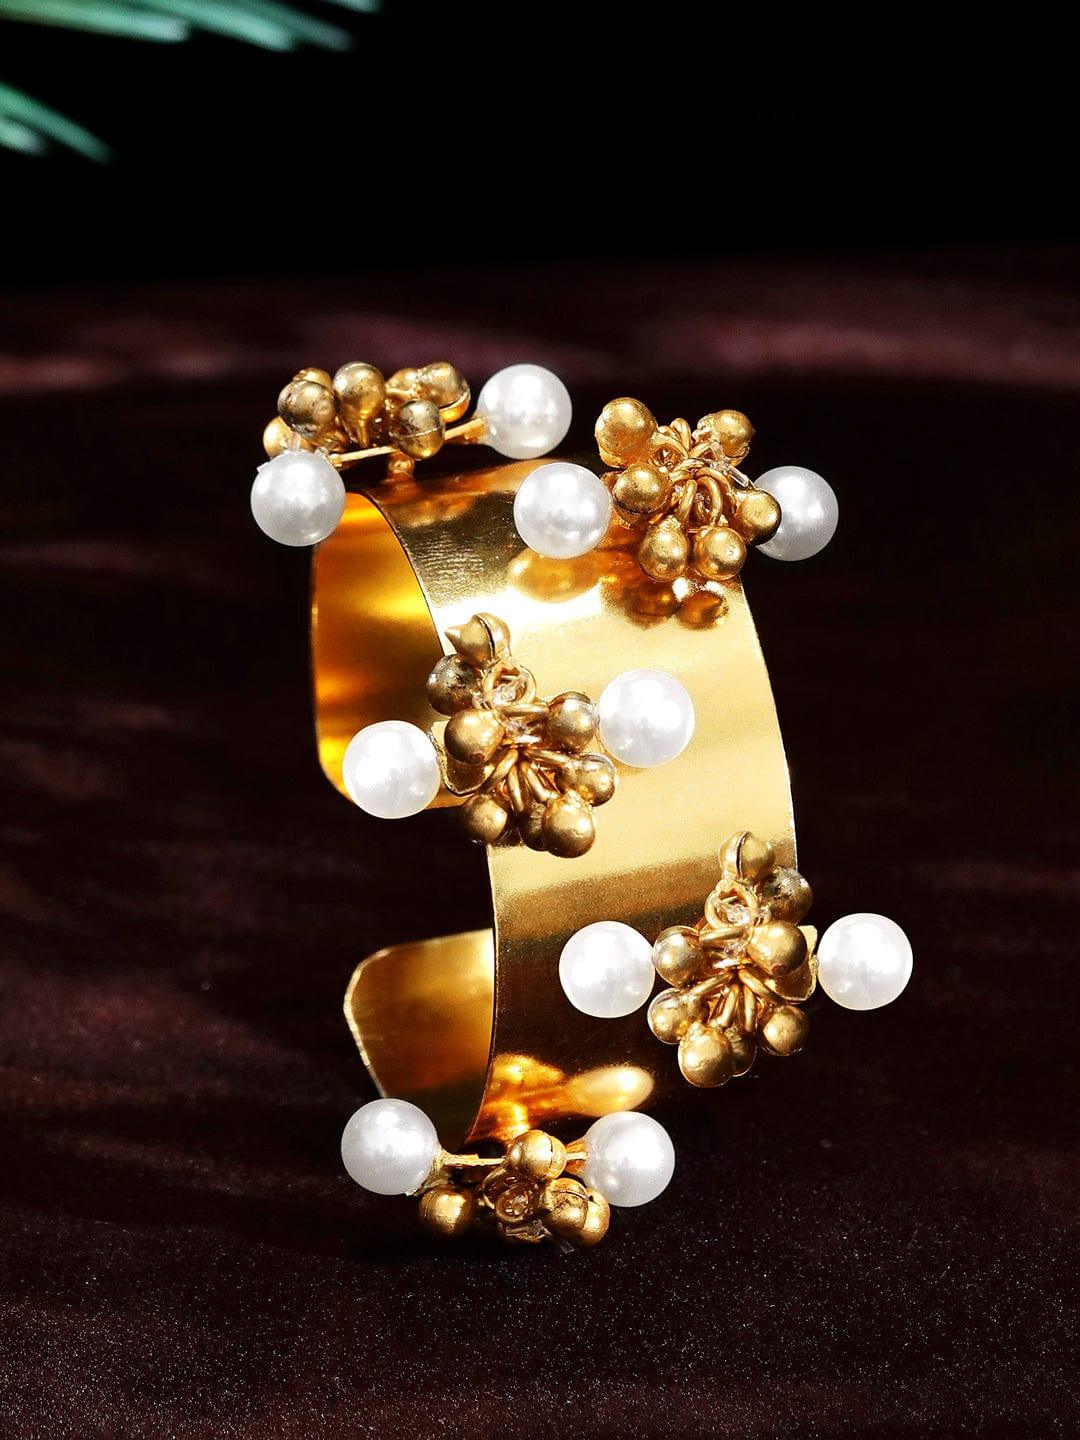 Rubans 24K Gold Plated Handcrafted Bracelet With Pearls And Golden Beads - Indiakreations